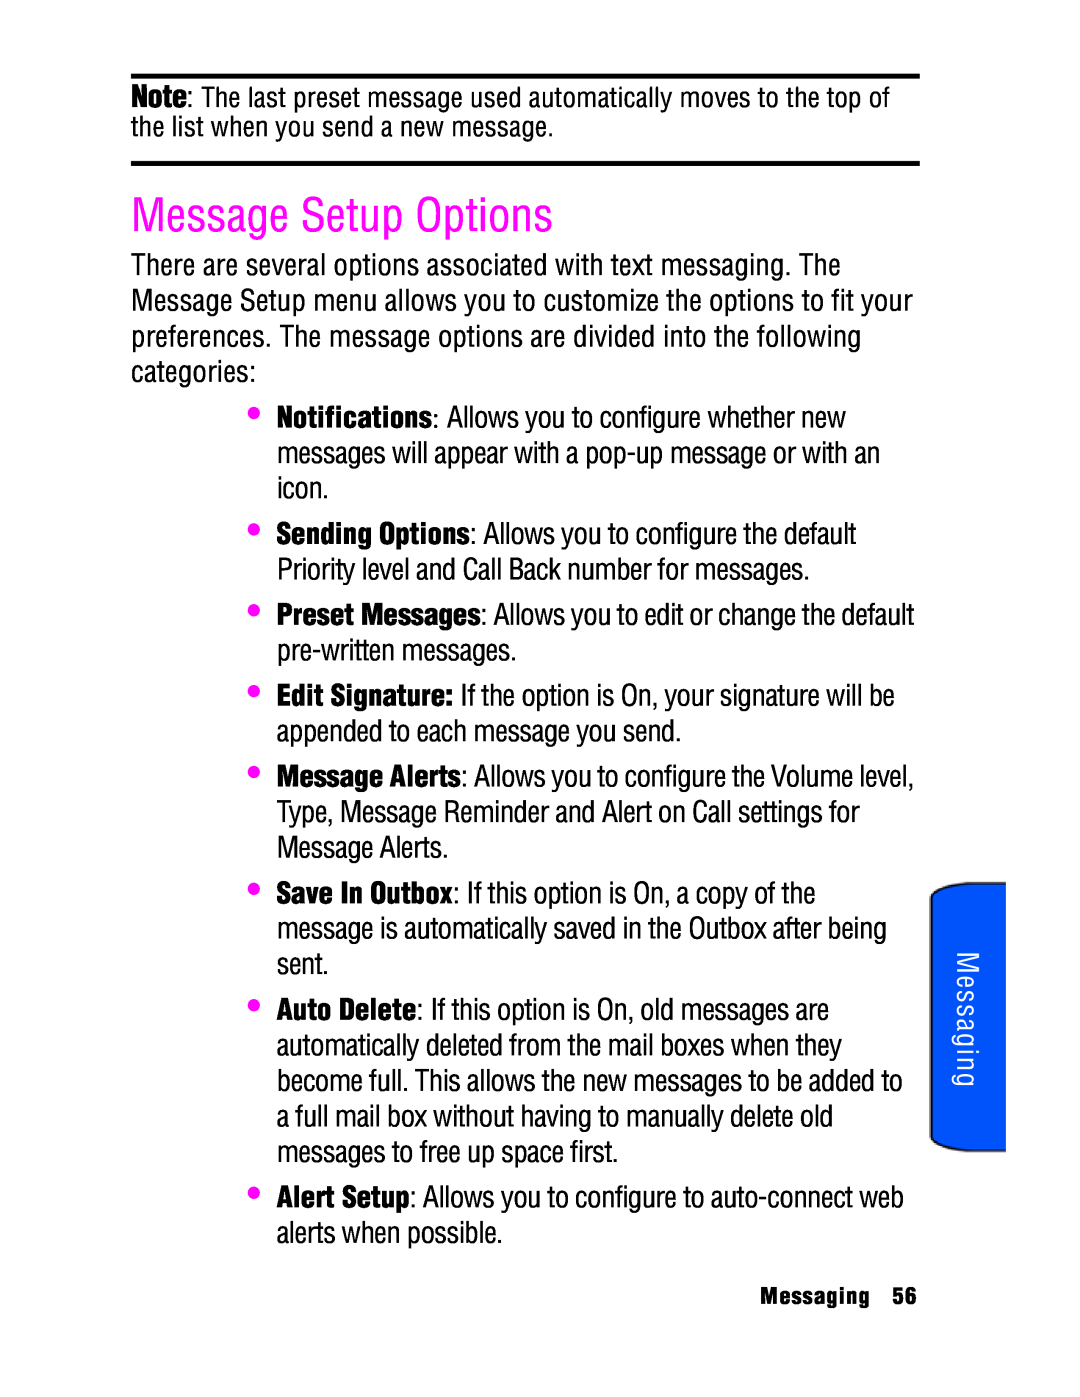 Samsung SPH-a740 manual Message Setup Options, Messaging 